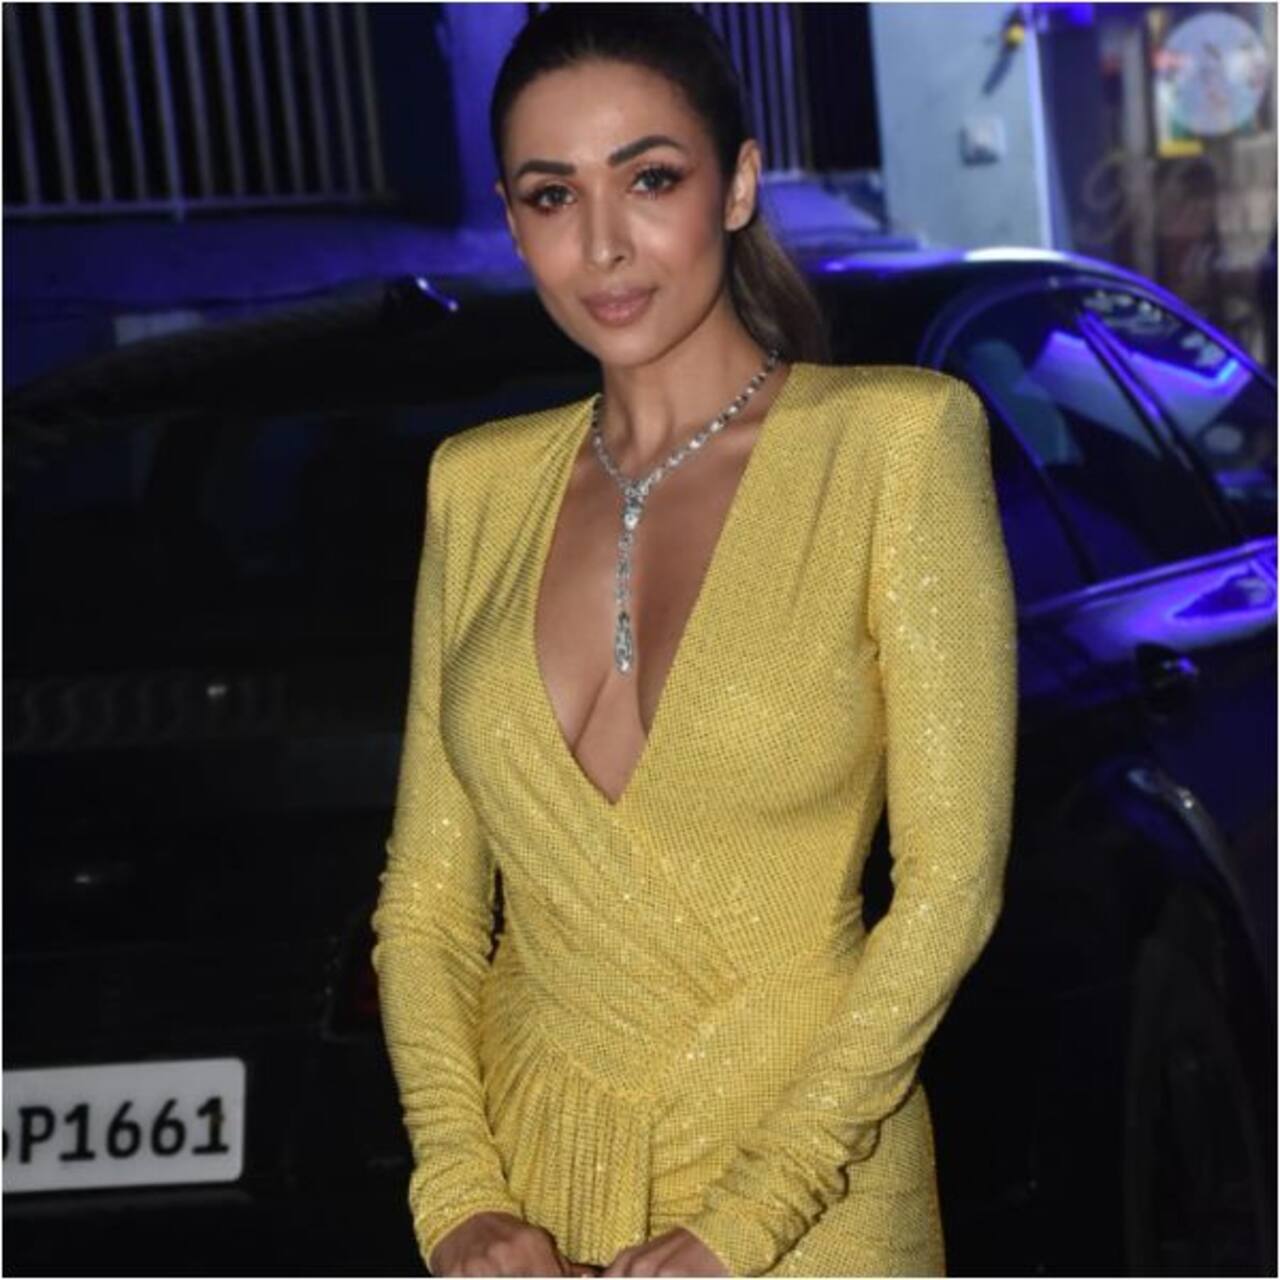 Malaika Arora Looks Hot In A Plunging Neckline Dress But Netizens Troll Her Say One More